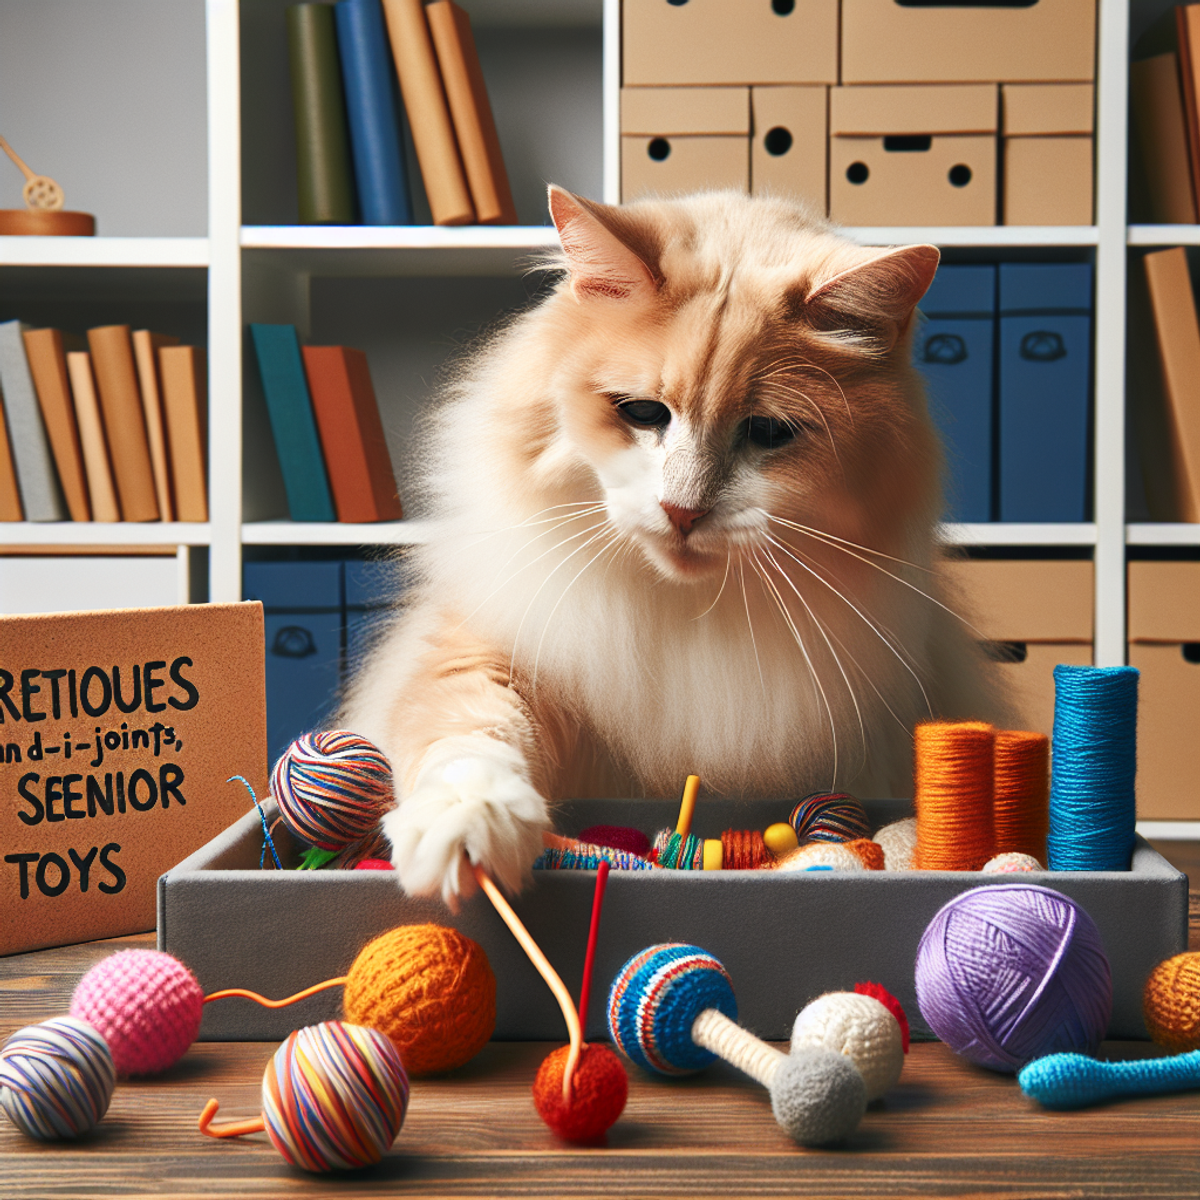 A senior cat playing with homemade toys in a cozy setting.